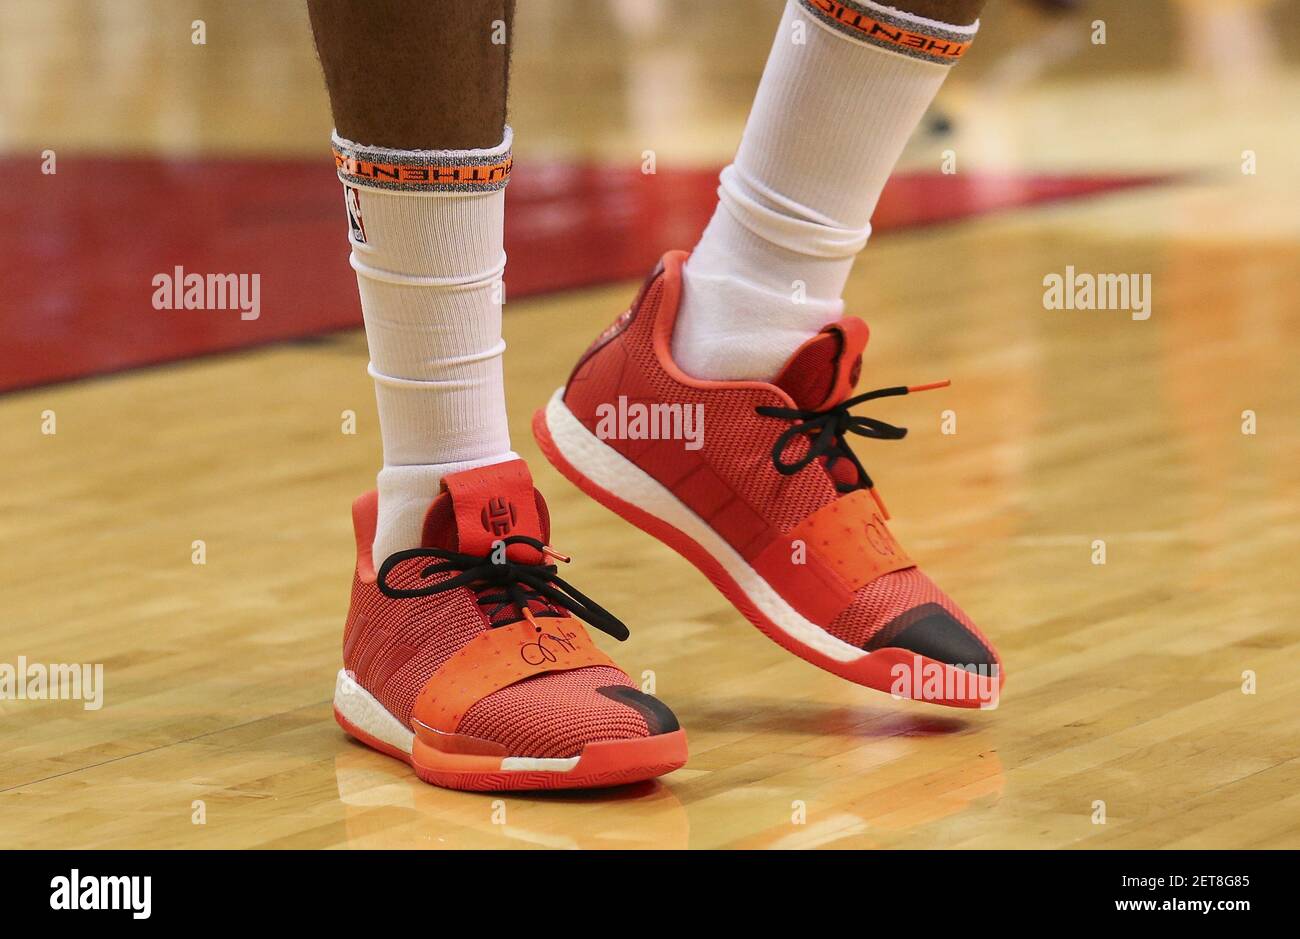 Dec 27, 2018; Houston, TX, USA; View of the shoes of Houston Rockets guard James  Harden (